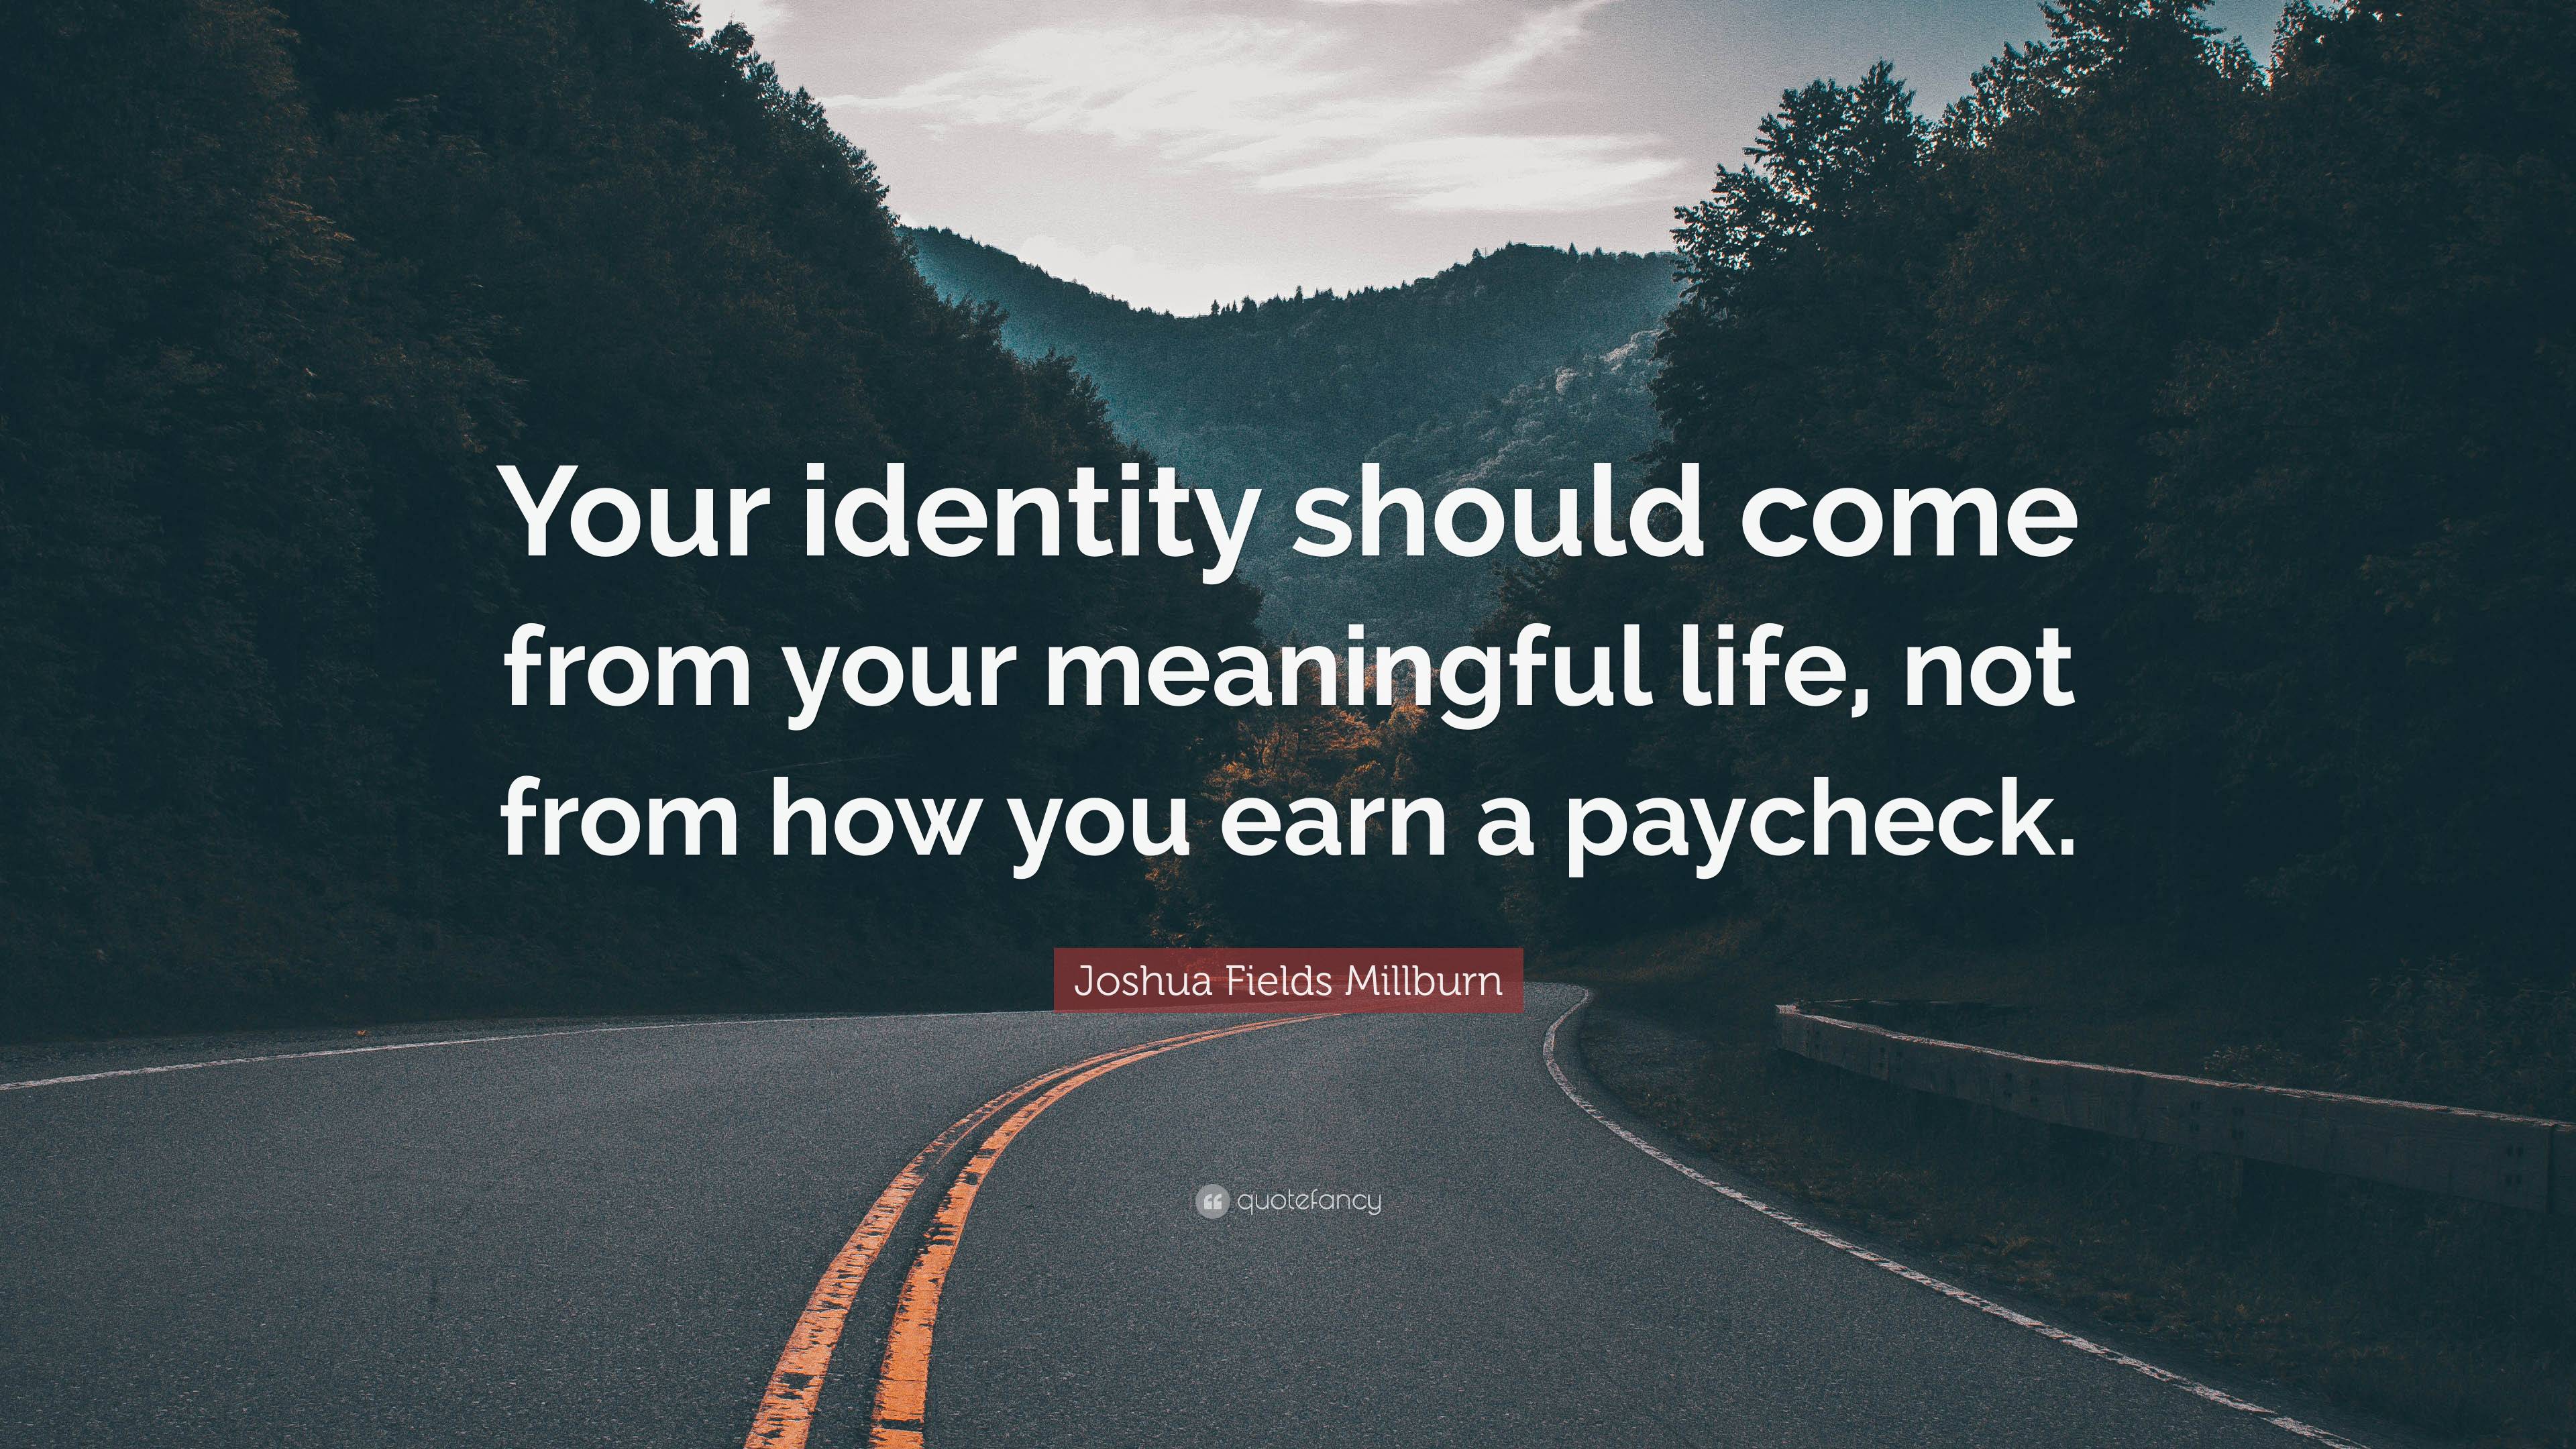 Joshua Fields Millburn Quote: “Your identity should come from your  meaningful life, not from how you